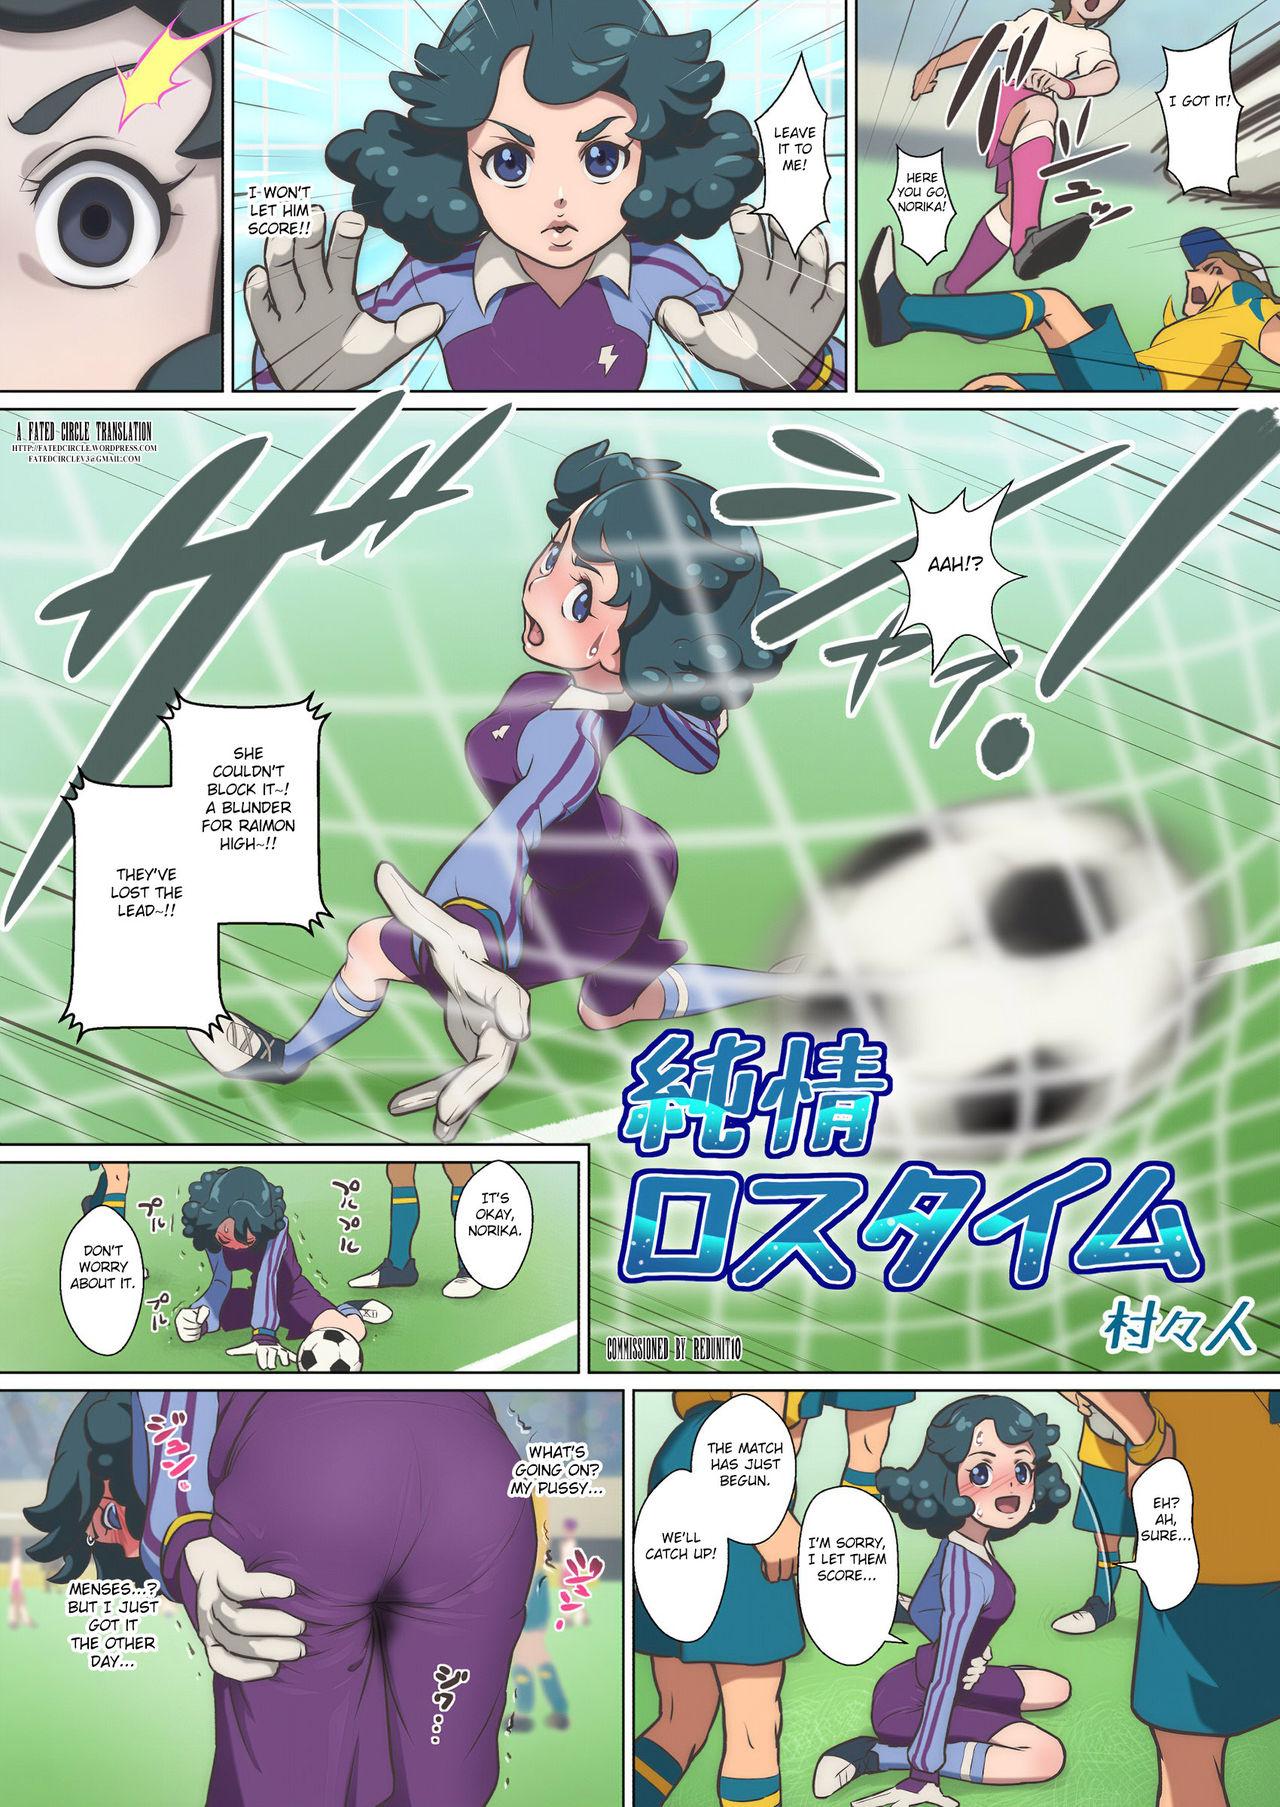 Tiny Junjou Loss Time - Inazuma eleven Doggystyle - Picture 1